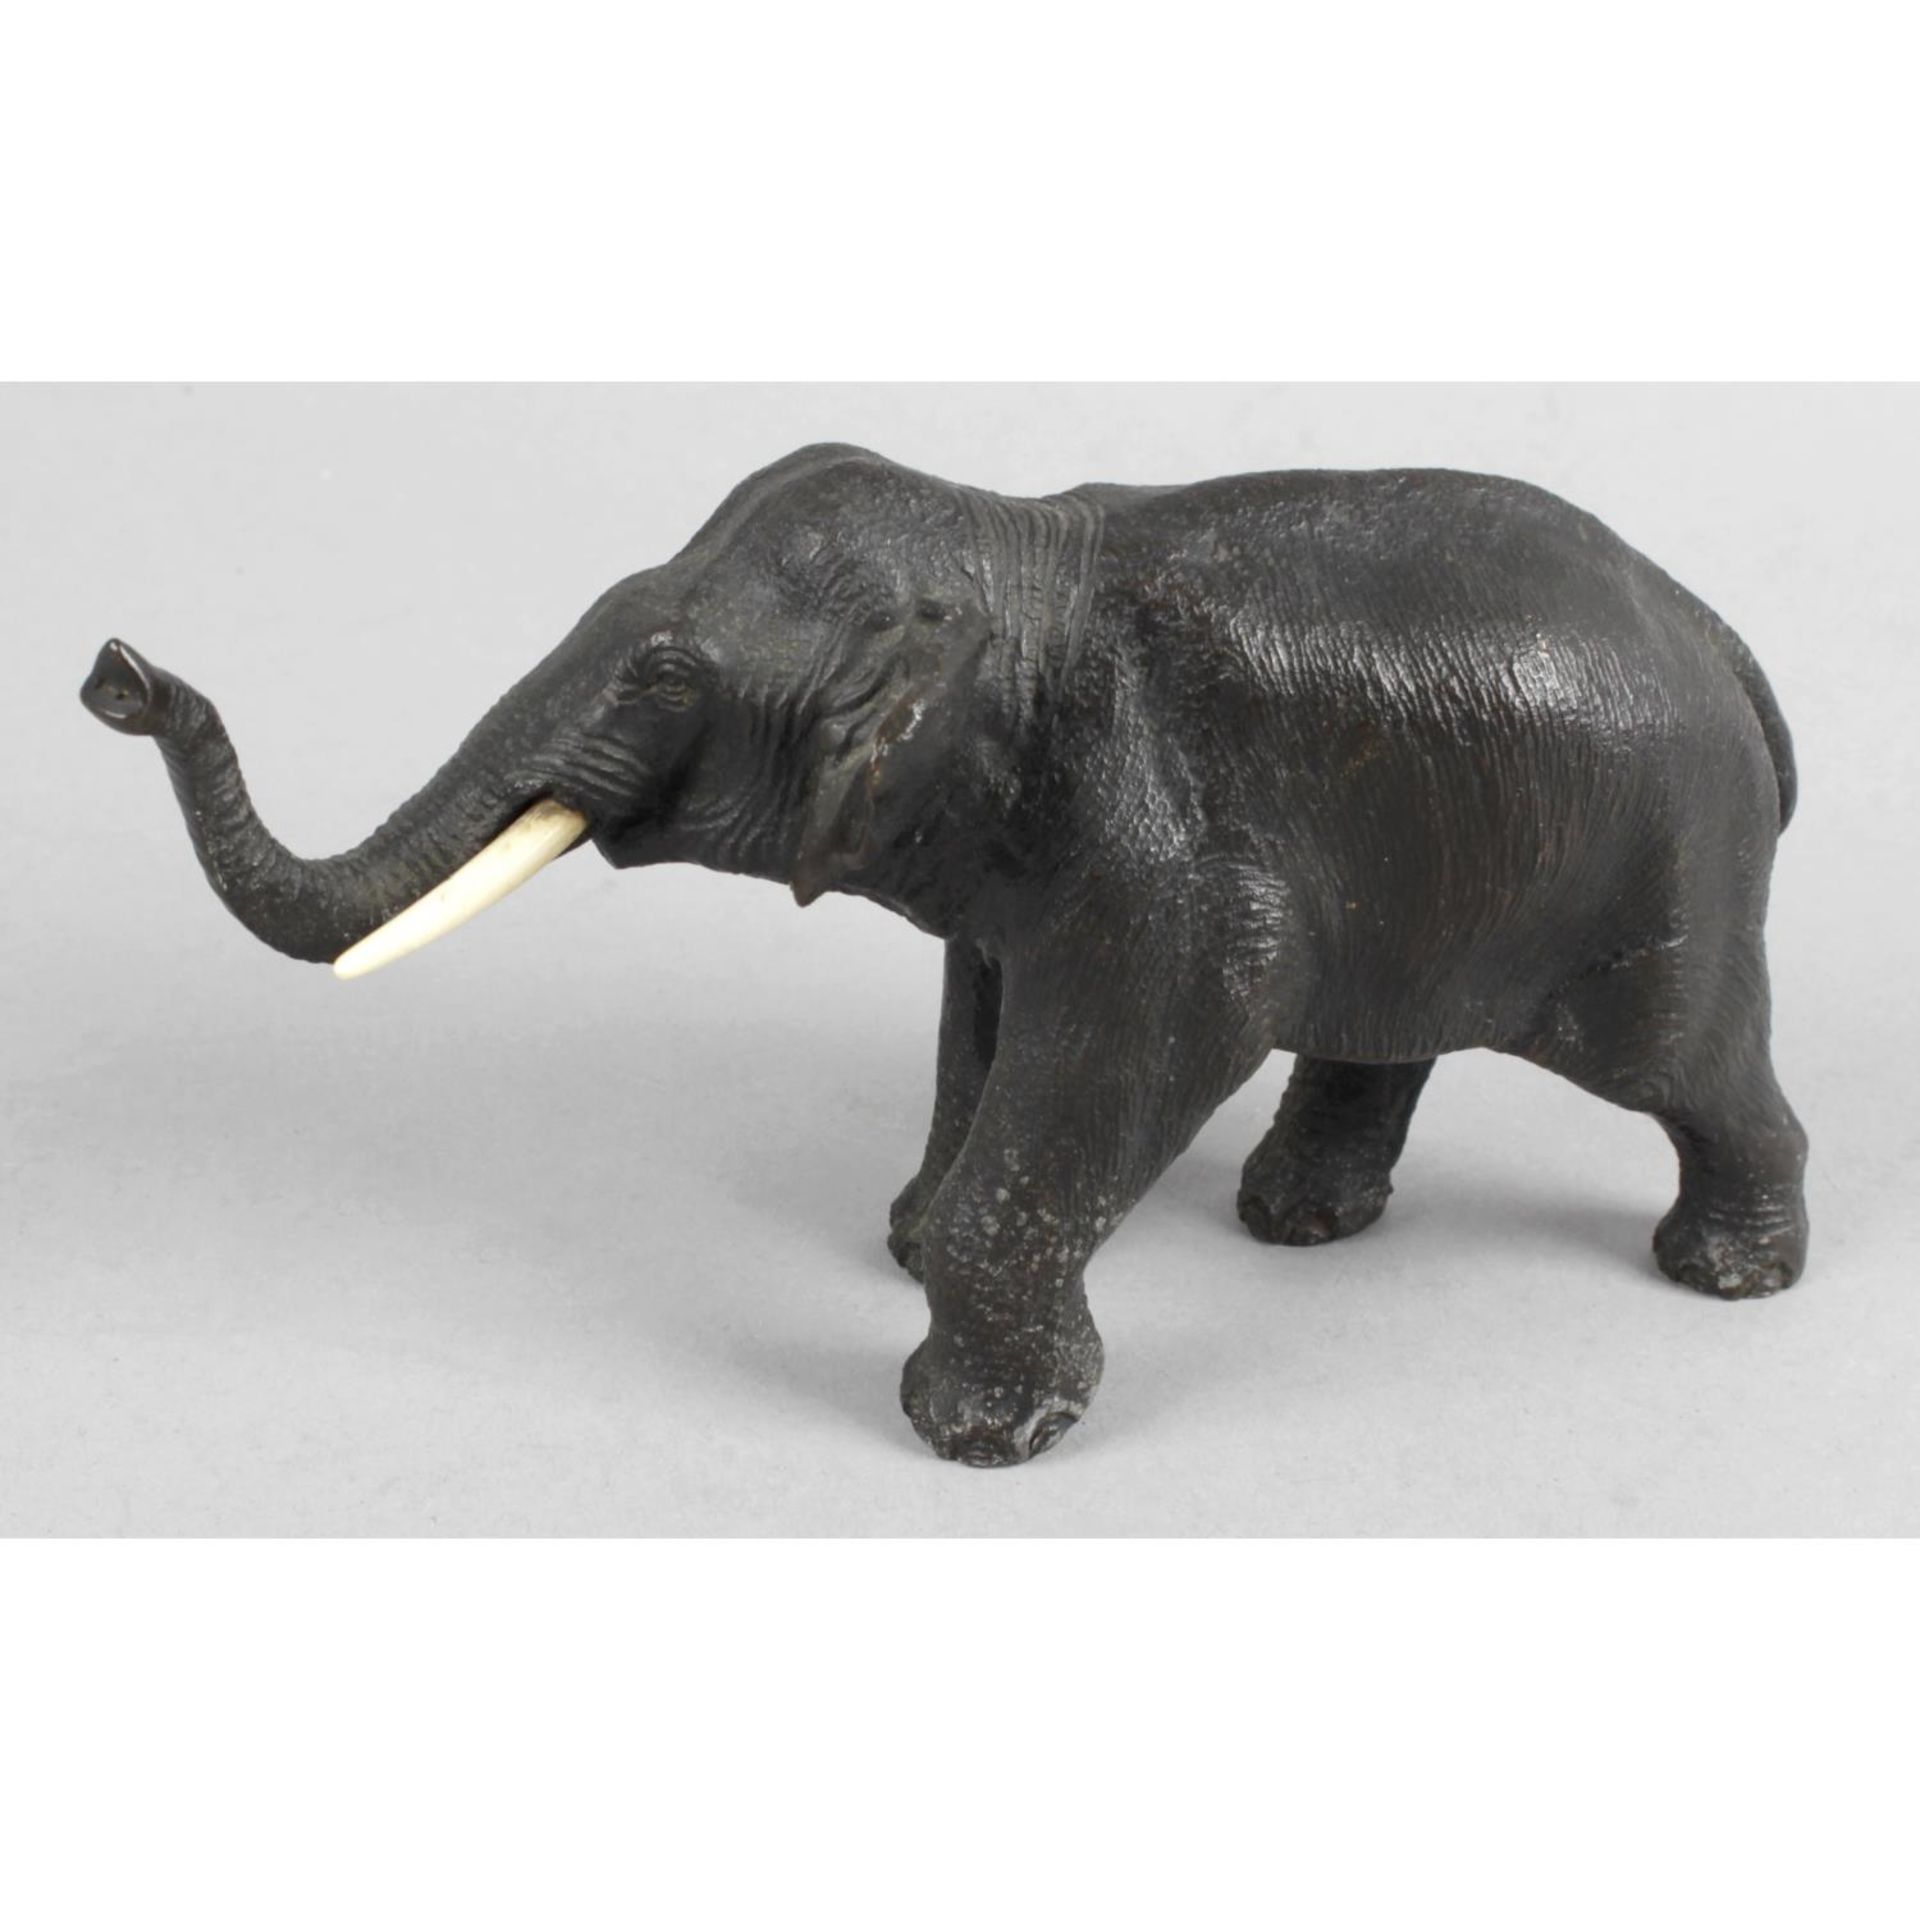 A Japanese Meiji period bronzed elephant, upstanding with head facing forward and trunk raised.